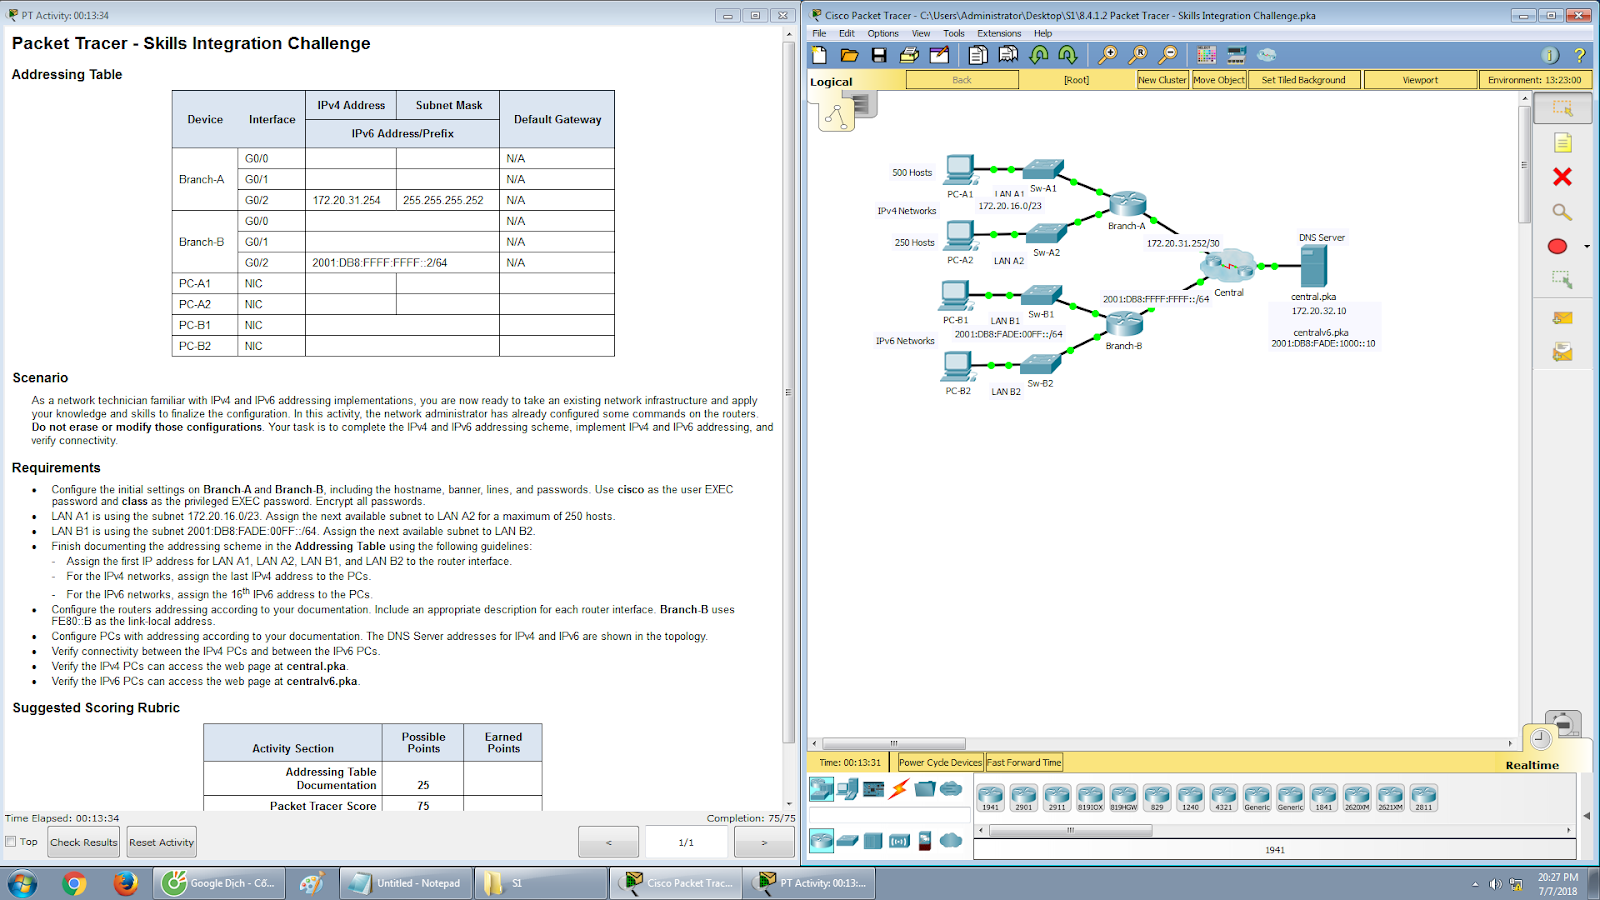 8.4.1.2 packet tracer